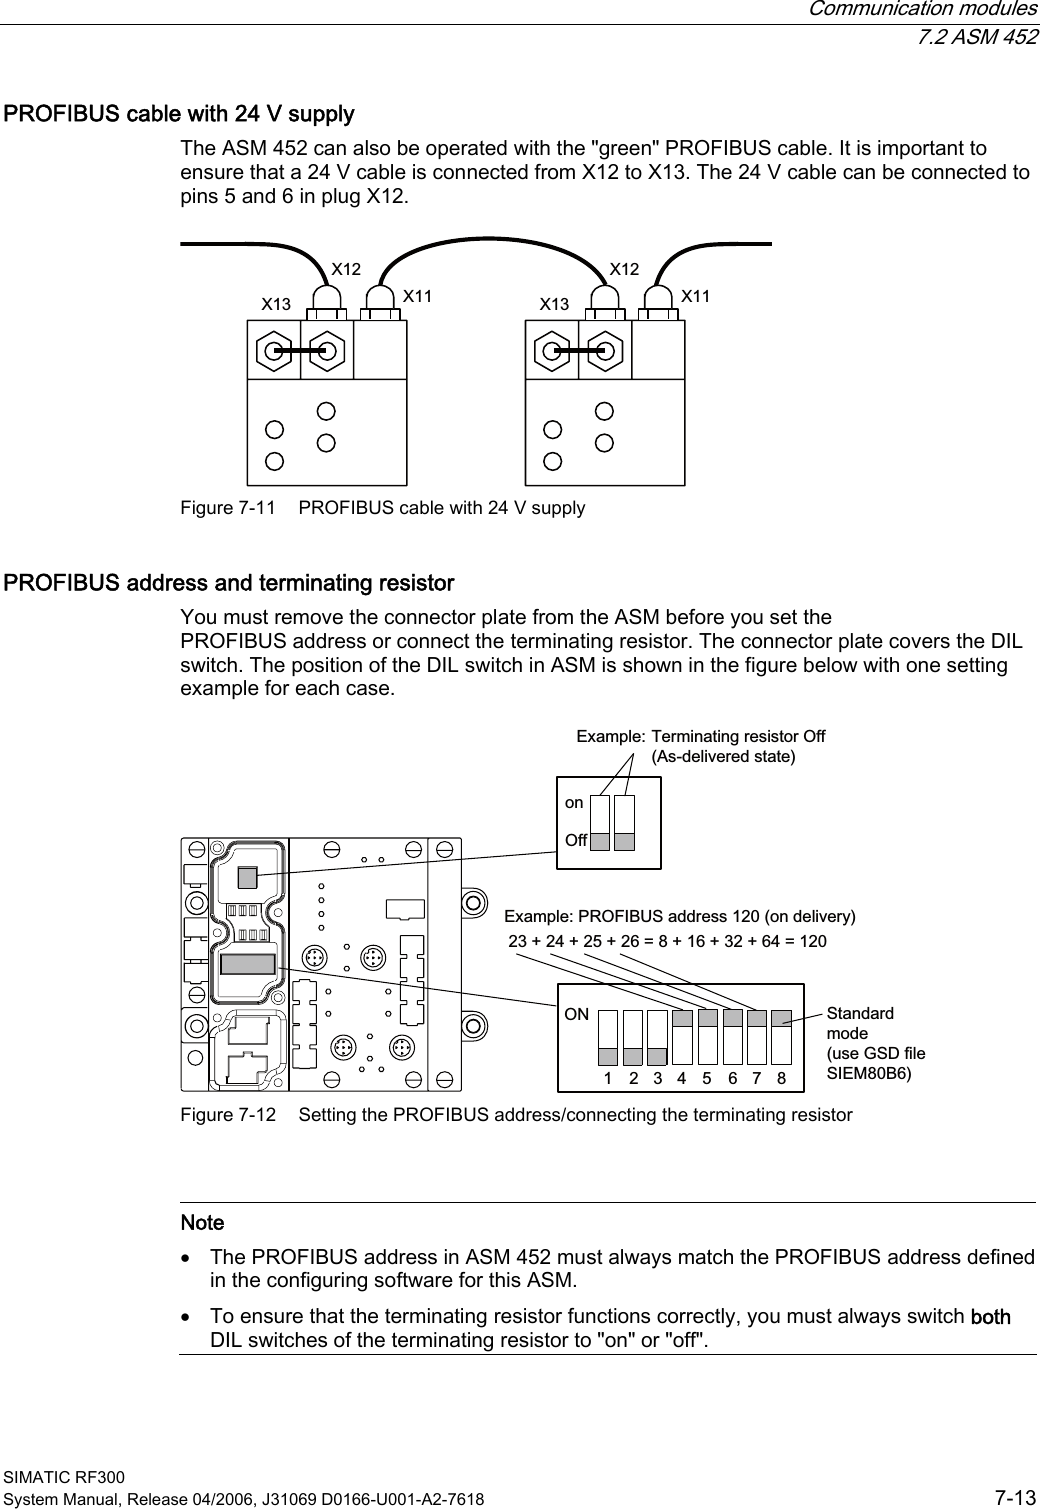  Communication modules  7.2 ASM 452 SIMATIC RF300 System Manual, Release 04/2006, J31069 D0166-U001-A2-7618  7-13 PROFIBUS cable with 24 V supply The ASM 452 can also be operated with the &quot;green&quot; PROFIBUS cable. It is important to ensure that a 24 V cable is connected from X12 to X13. The 24 V cable can be connected to pins 5 and 6 in plug X12. ; ;;; ;; Figure 7-11  PROFIBUS cable with 24 V supply PROFIBUS address and terminating resistor You must remove the connector plate from the ASM before you set the  PROFIBUS address or connect the terminating resistor. The connector plate covers the DIL switch. The position of the DIL switch in ASM is shown in the figure below with one setting example for each case. 212IIRQ  ([DPSOH352),%86DGGUHVVRQGHOLYHU\([DPSOH7HUPLQDWLQJUHVLVWRU2II $VGHOLYHUHGVWDWH6WDQGDUGPRGHXVH*6&apos;ILOH6,(0%   Figure 7-12  Setting the PROFIBUS address/connecting the terminating resistor   Note • The PROFIBUS address in ASM 452 must always match the PROFIBUS address defined in the configuring software for this ASM. • To ensure that the terminating resistor functions correctly, you must always switch both DIL switches of the terminating resistor to &quot;on&quot; or &quot;off&quot;. 